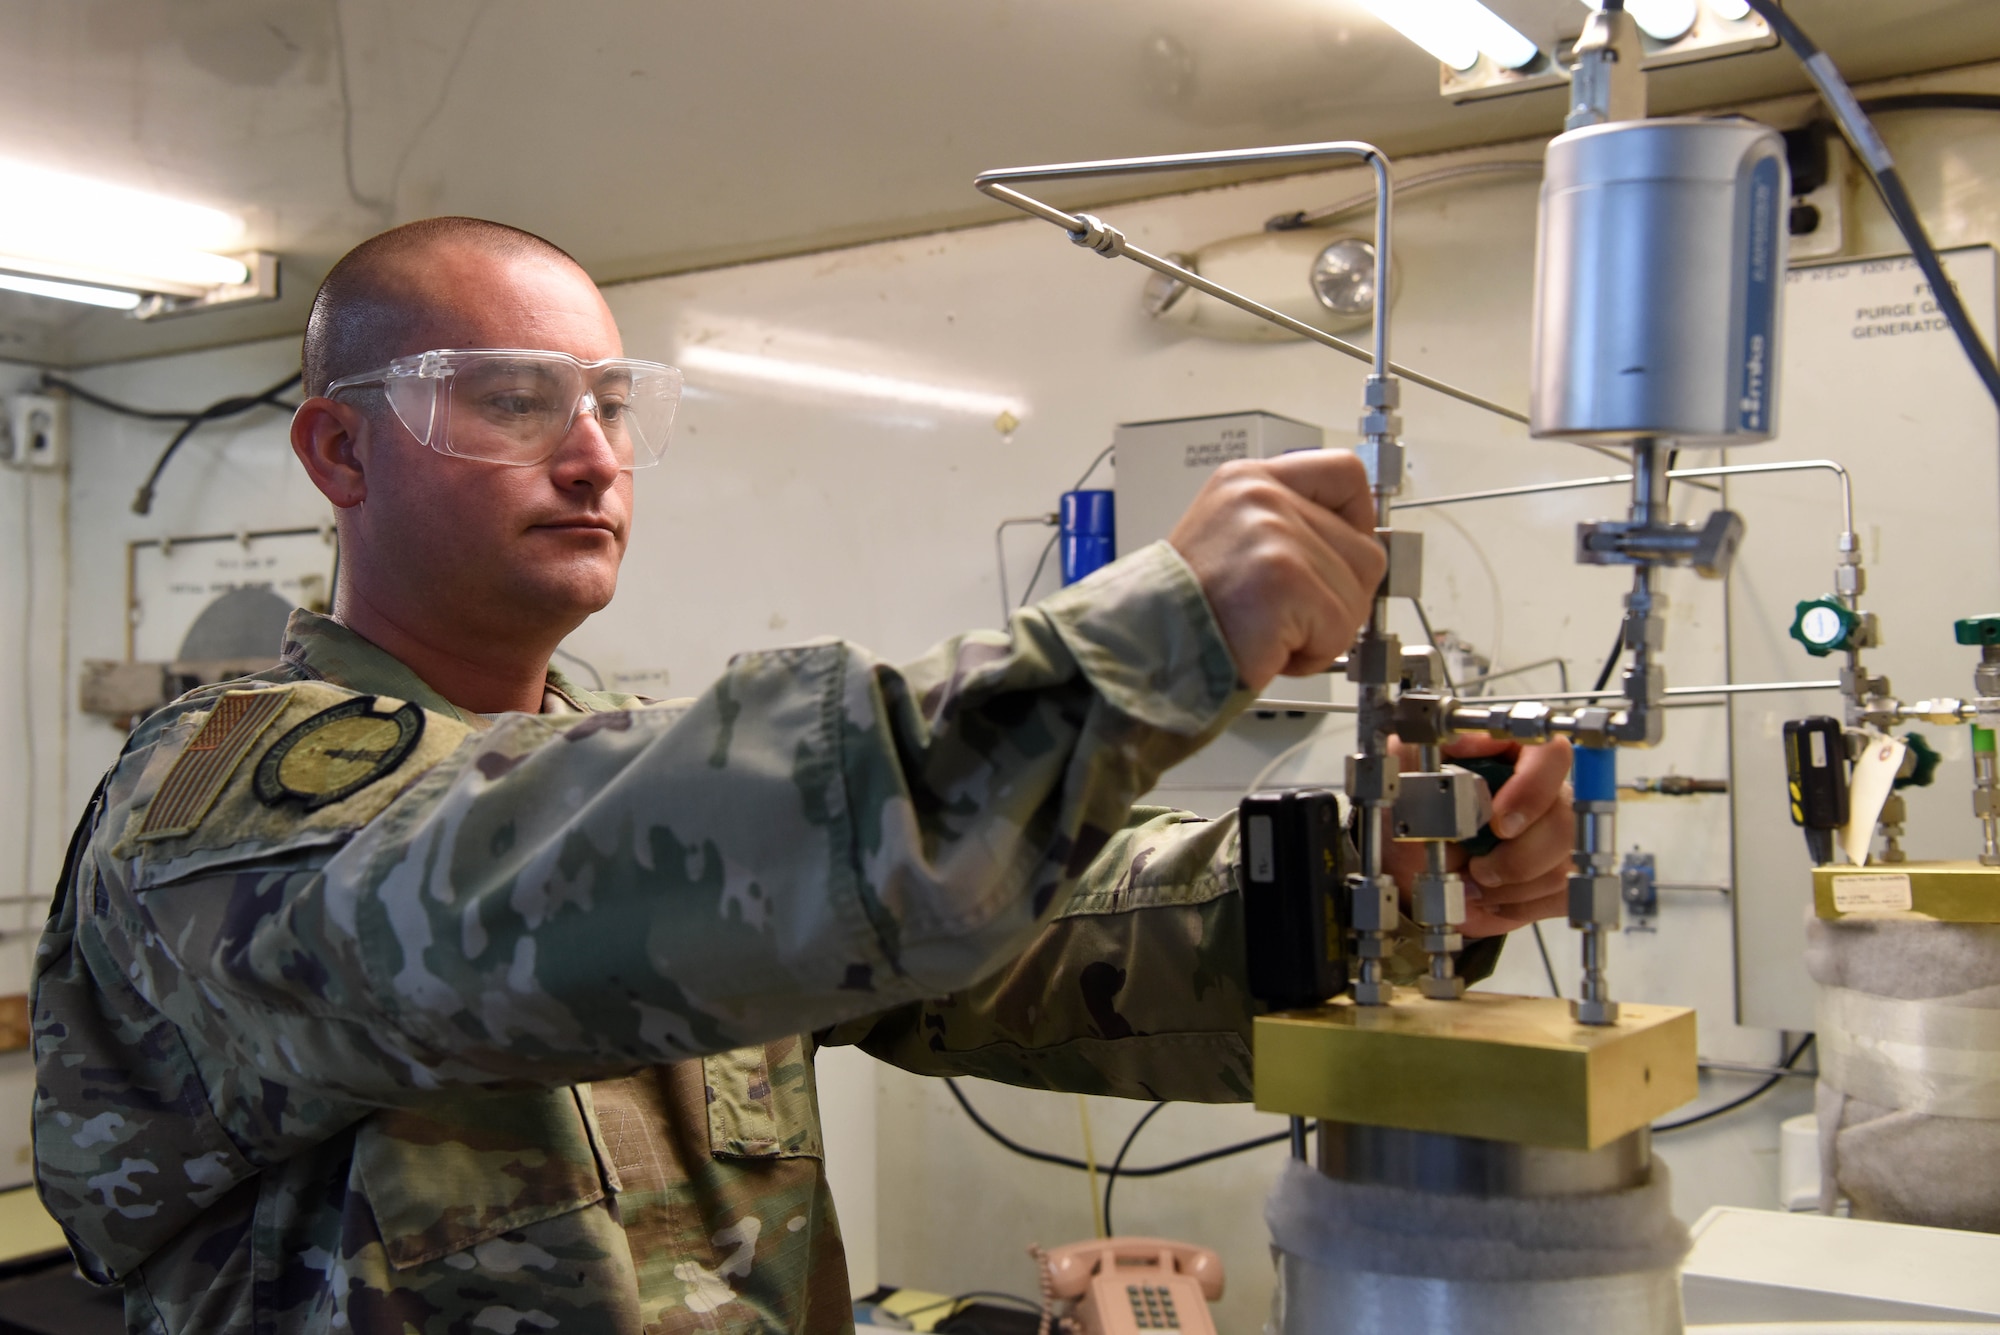 The 379th Expeditionary Logistics Readiness Squadron provides a “home” for the Air Force Petroleum Office. The team of three provides quality assurance and control of fuels and gases for the U.S. Central Command area of responsibility.